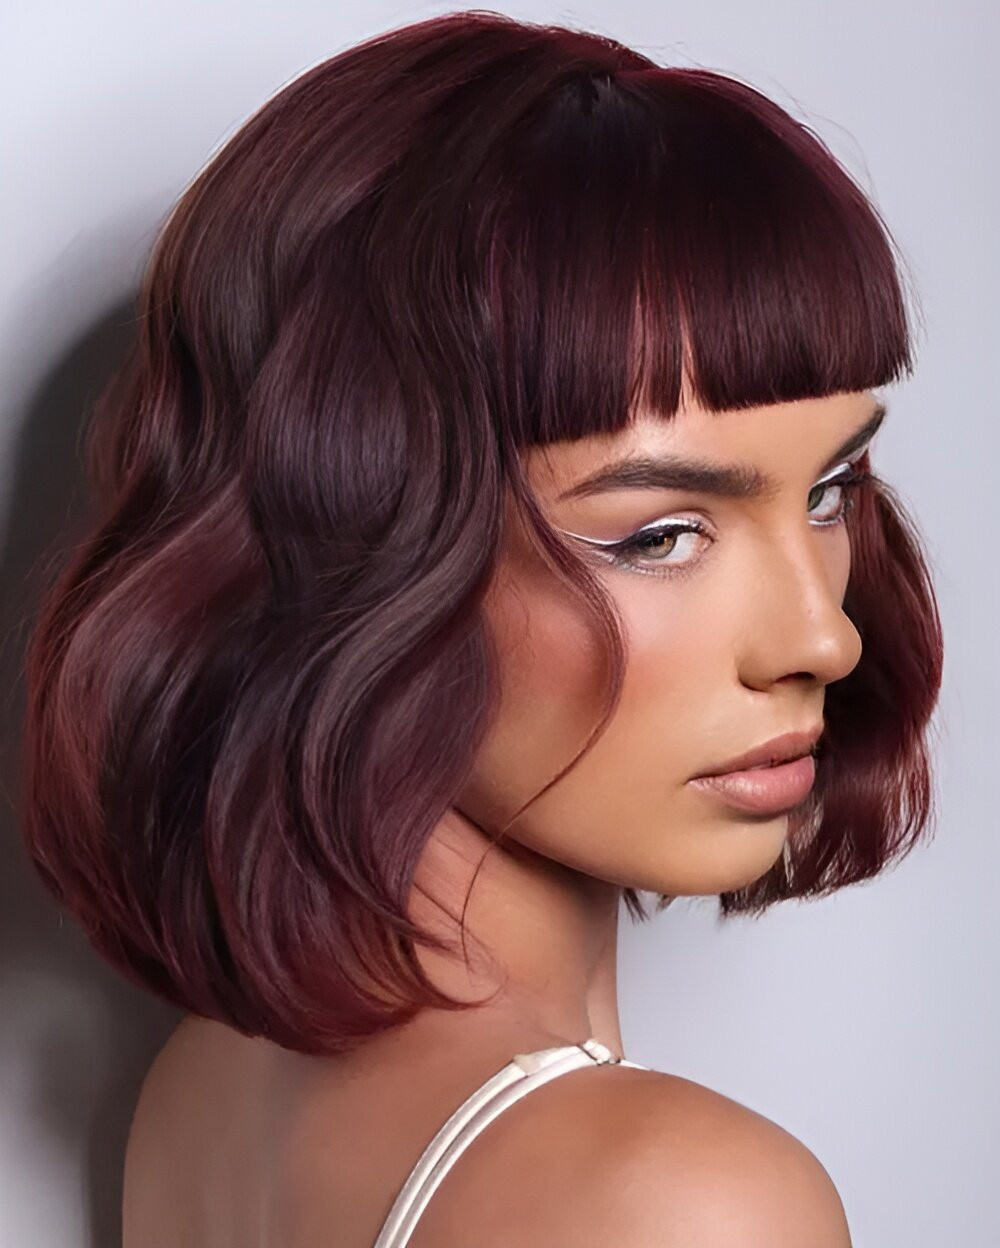 Become A Model With These 27 Gorgeous Plum Hair Color Ideas - 213